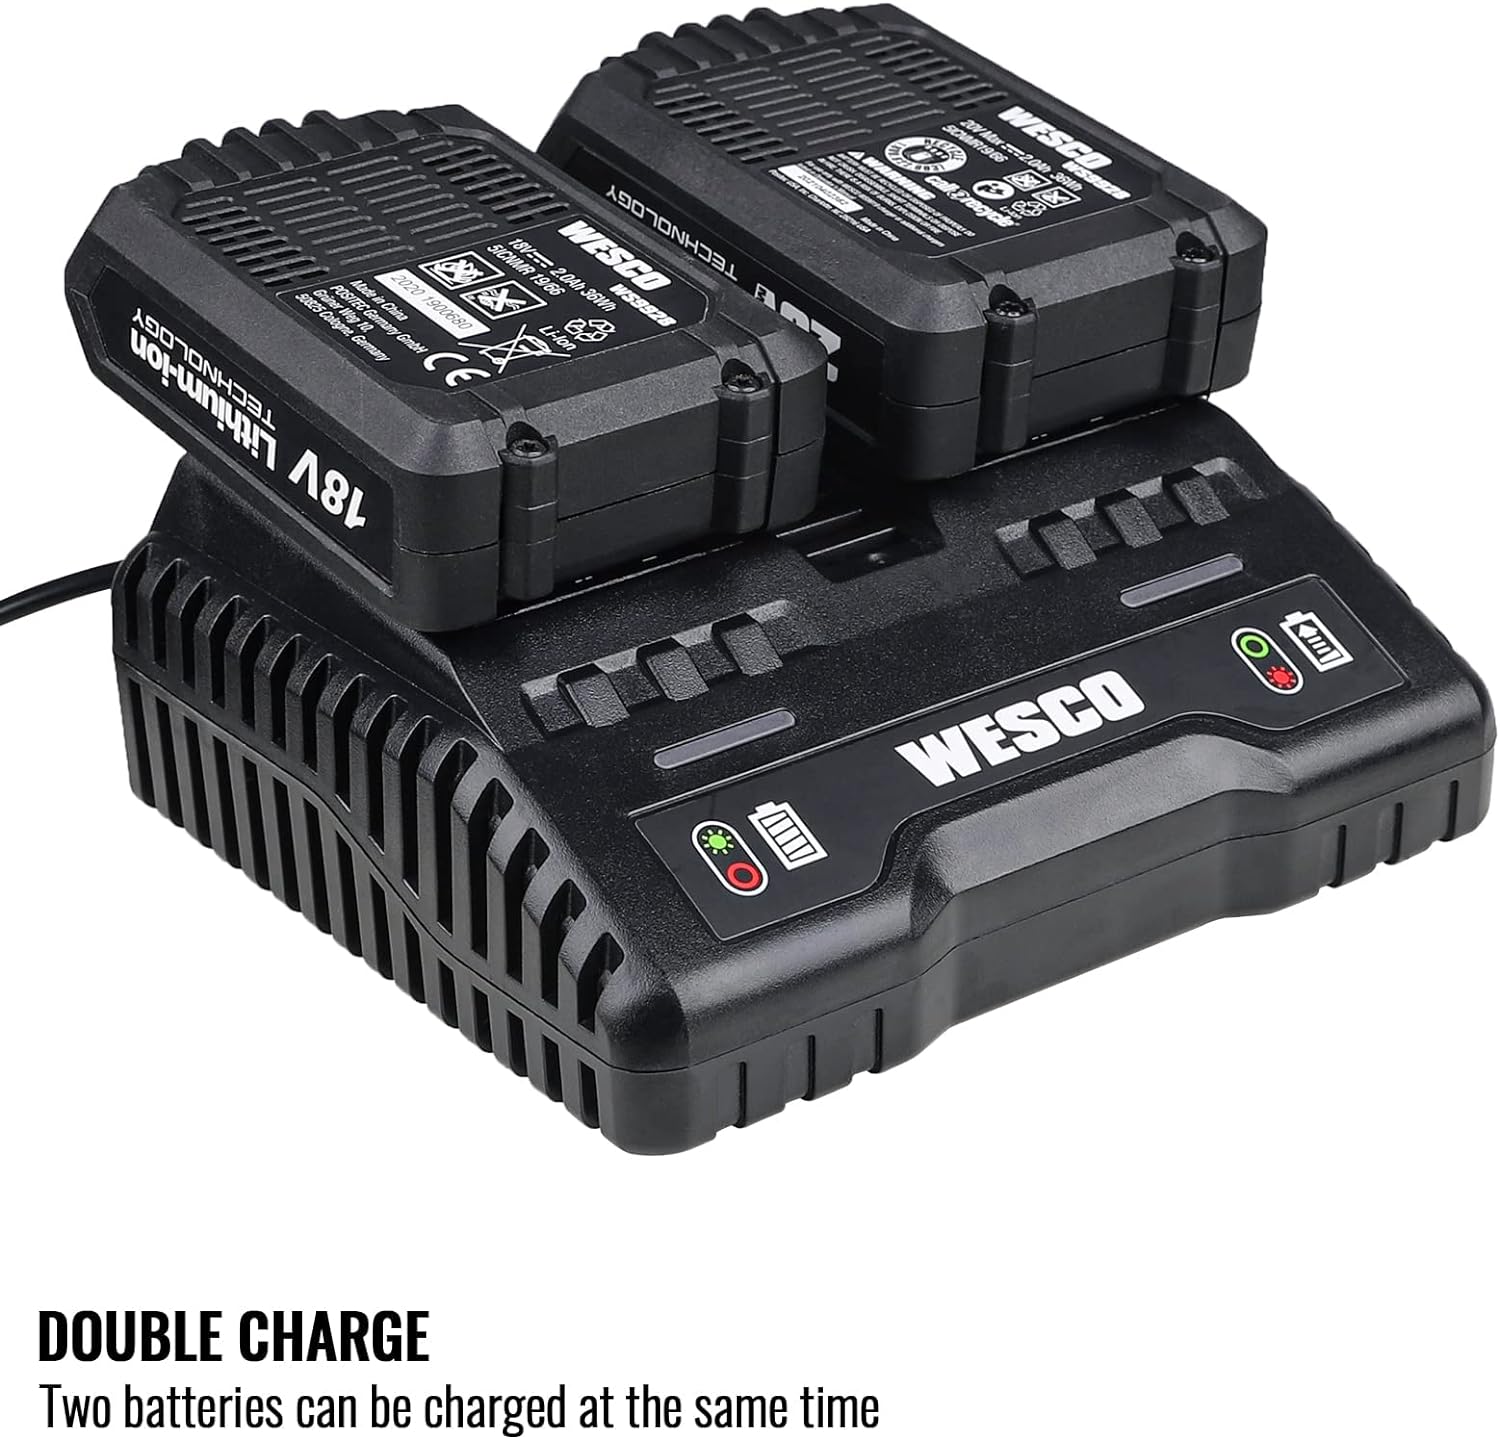 WESCO 2x 18V/ 2A Dual Port Battery Charger, WS9919